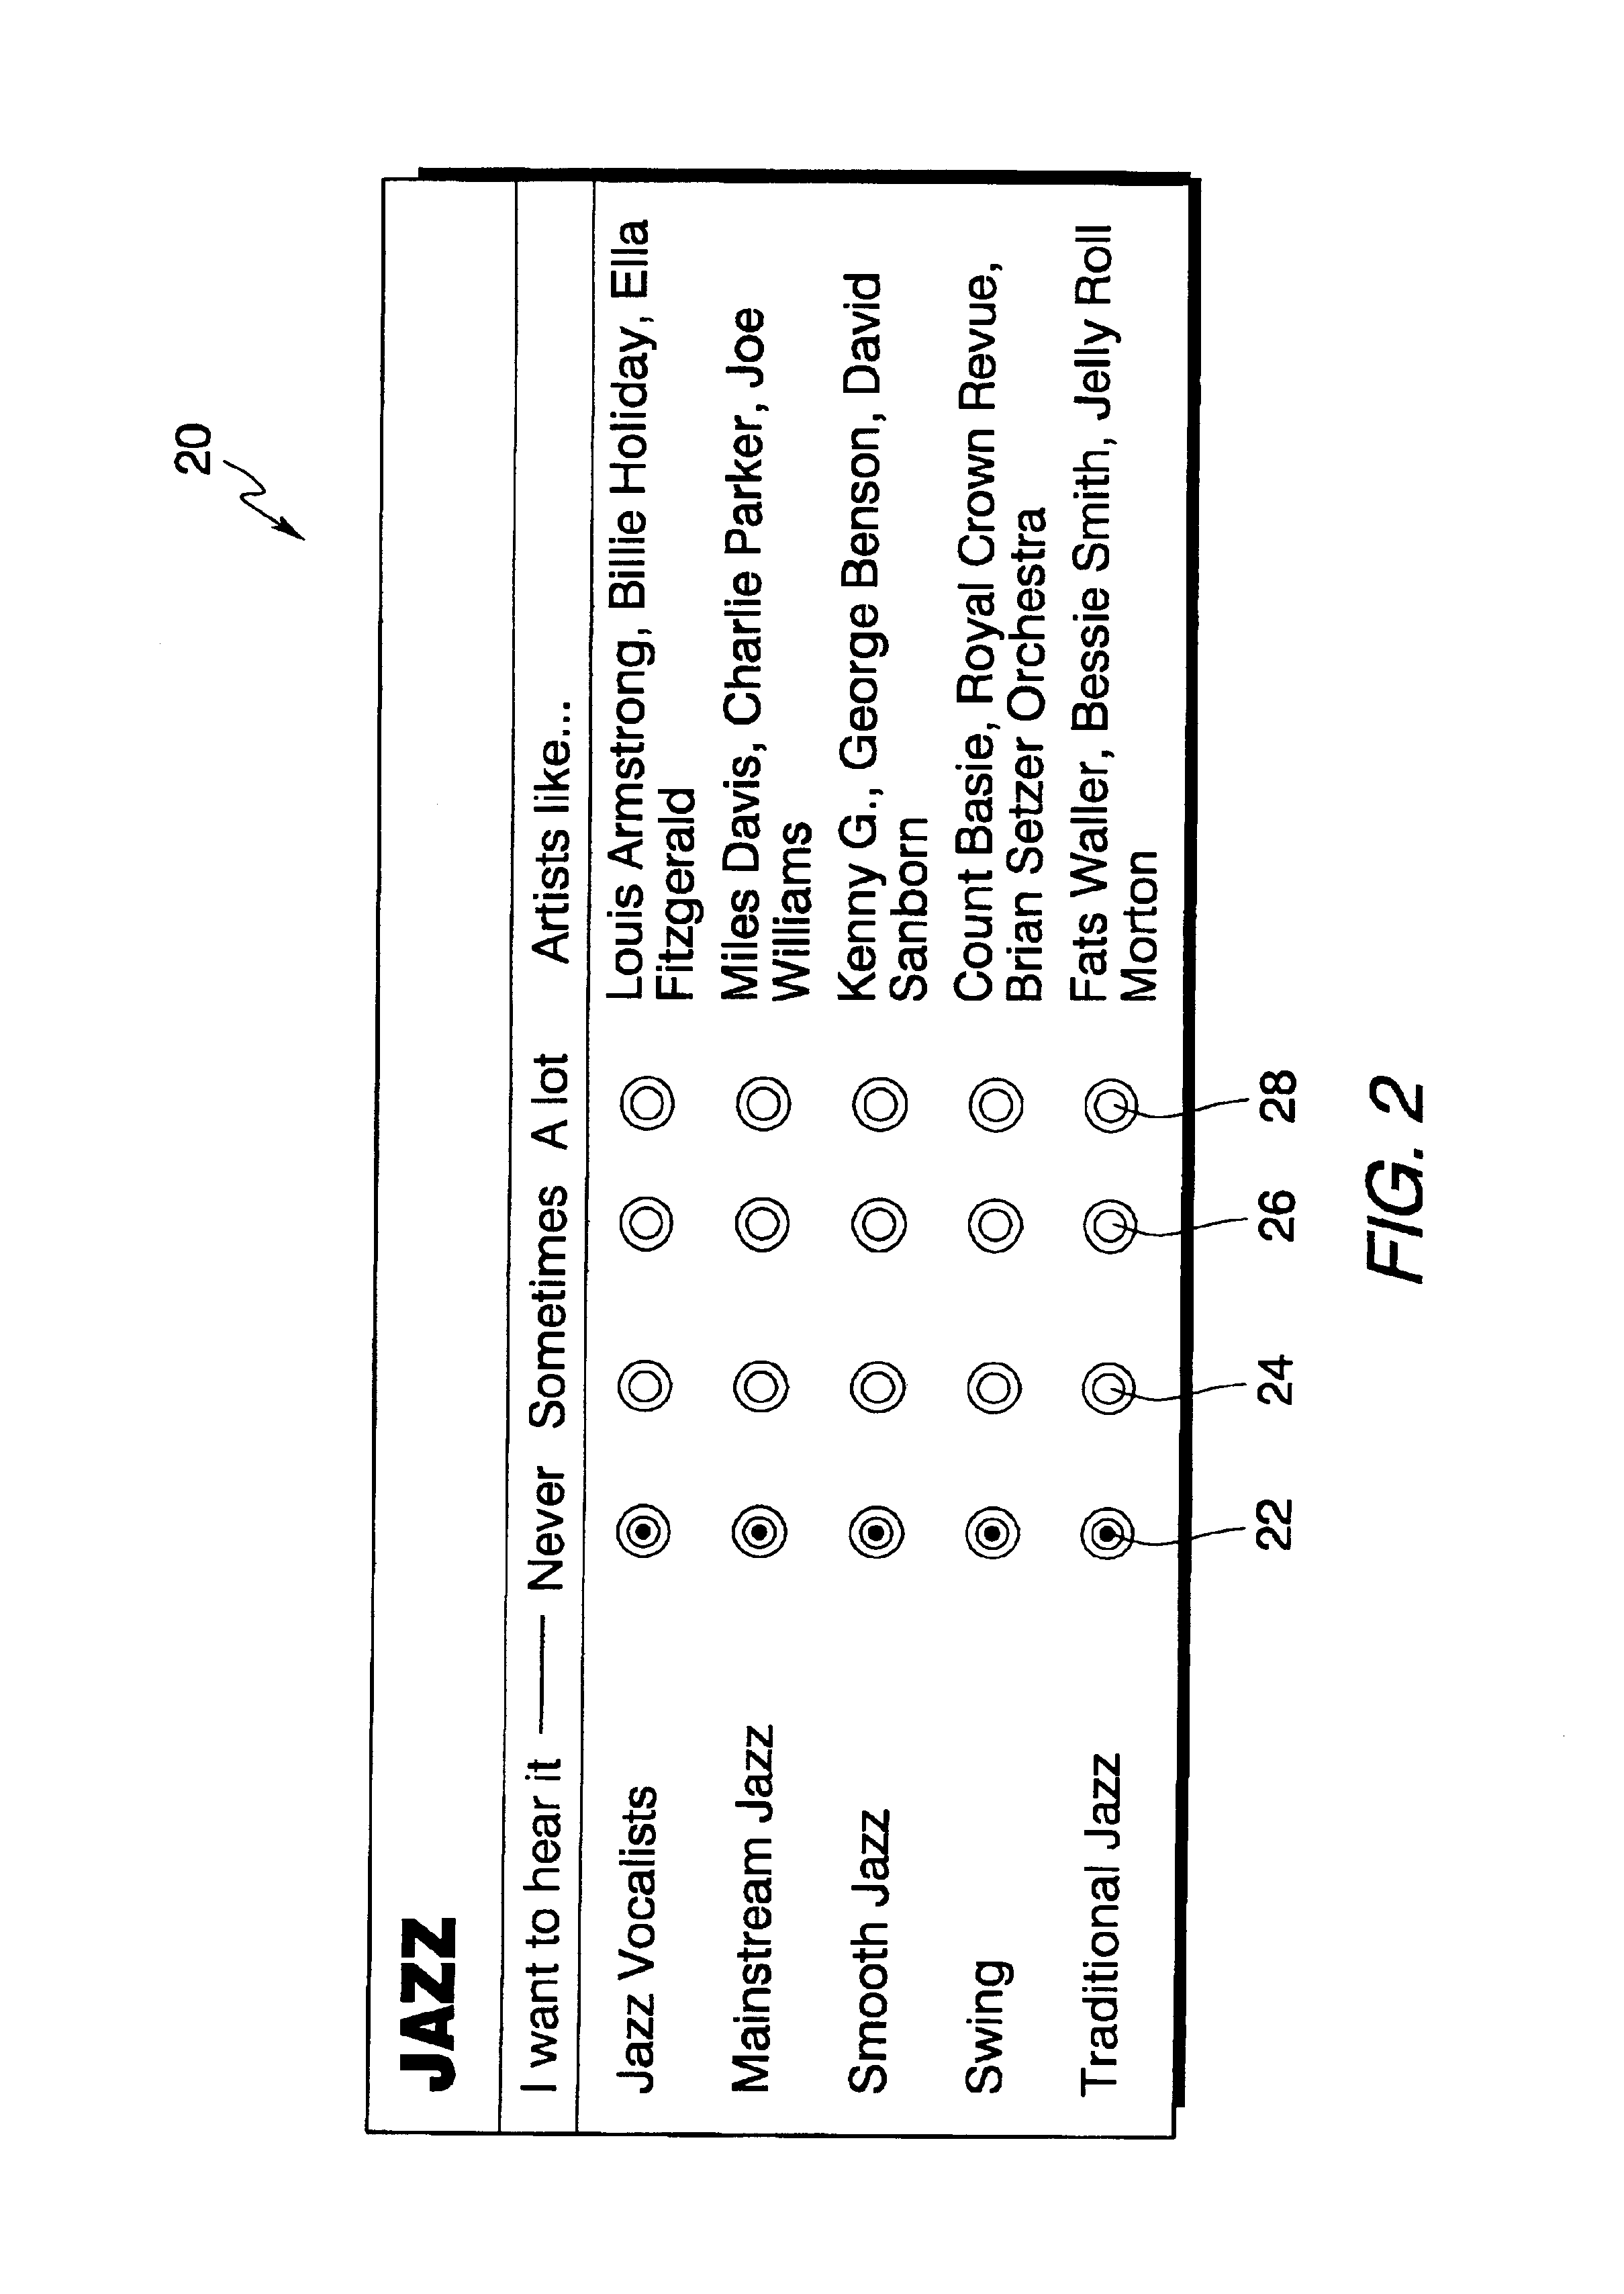 Method for producing playlists for personalized music stations and for transmitting songs on such playlists